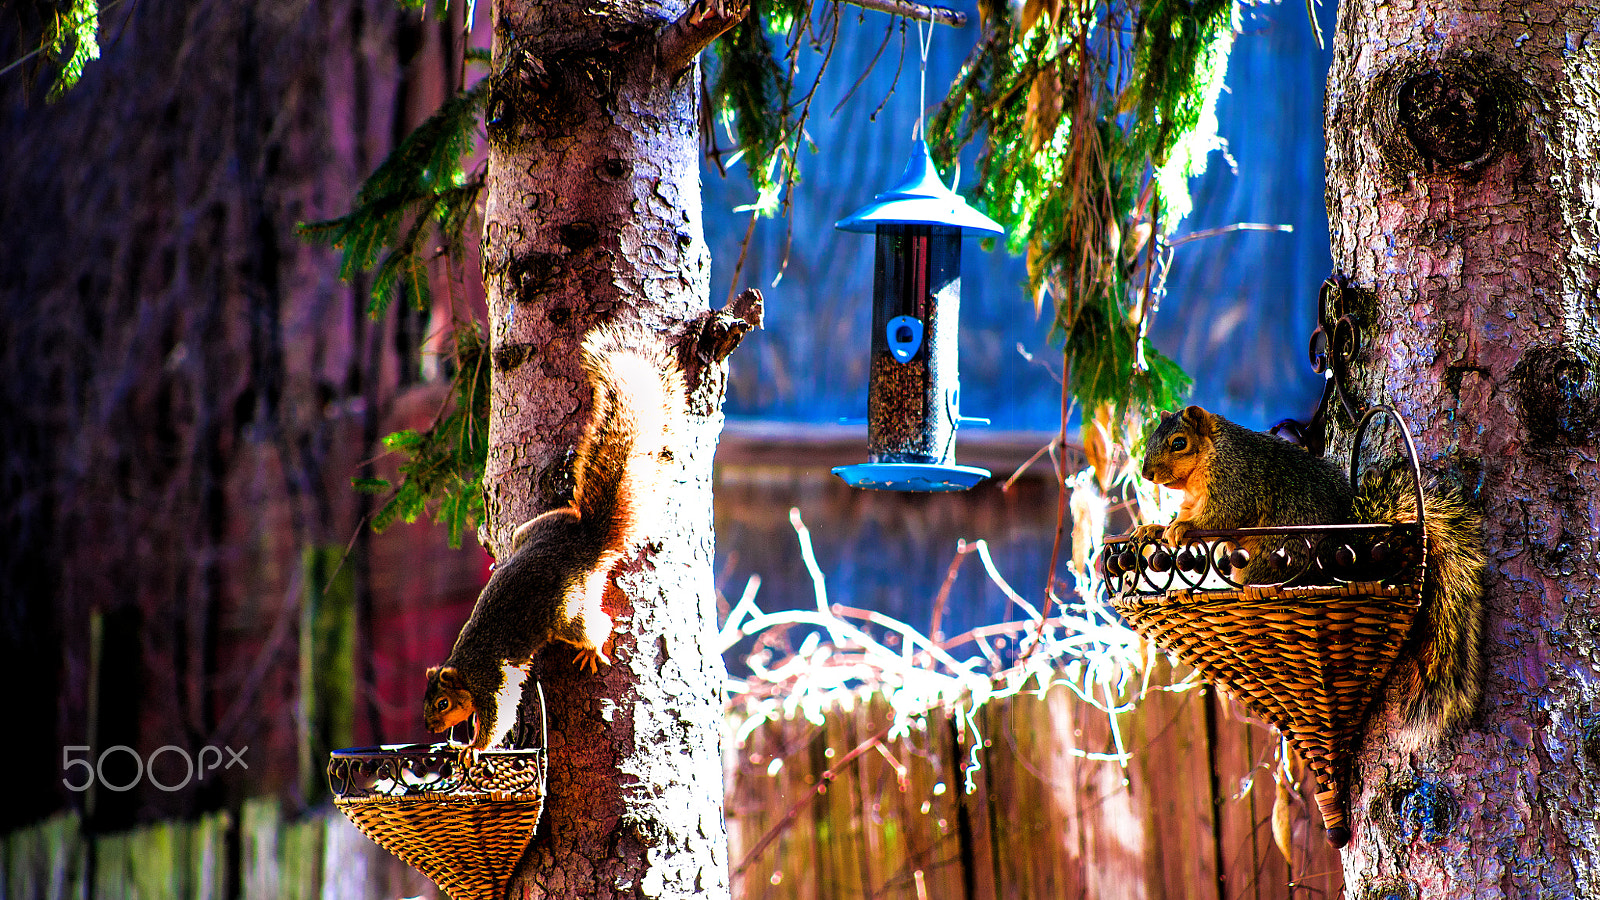 Sony a7 sample photo. Squirrels eating photography